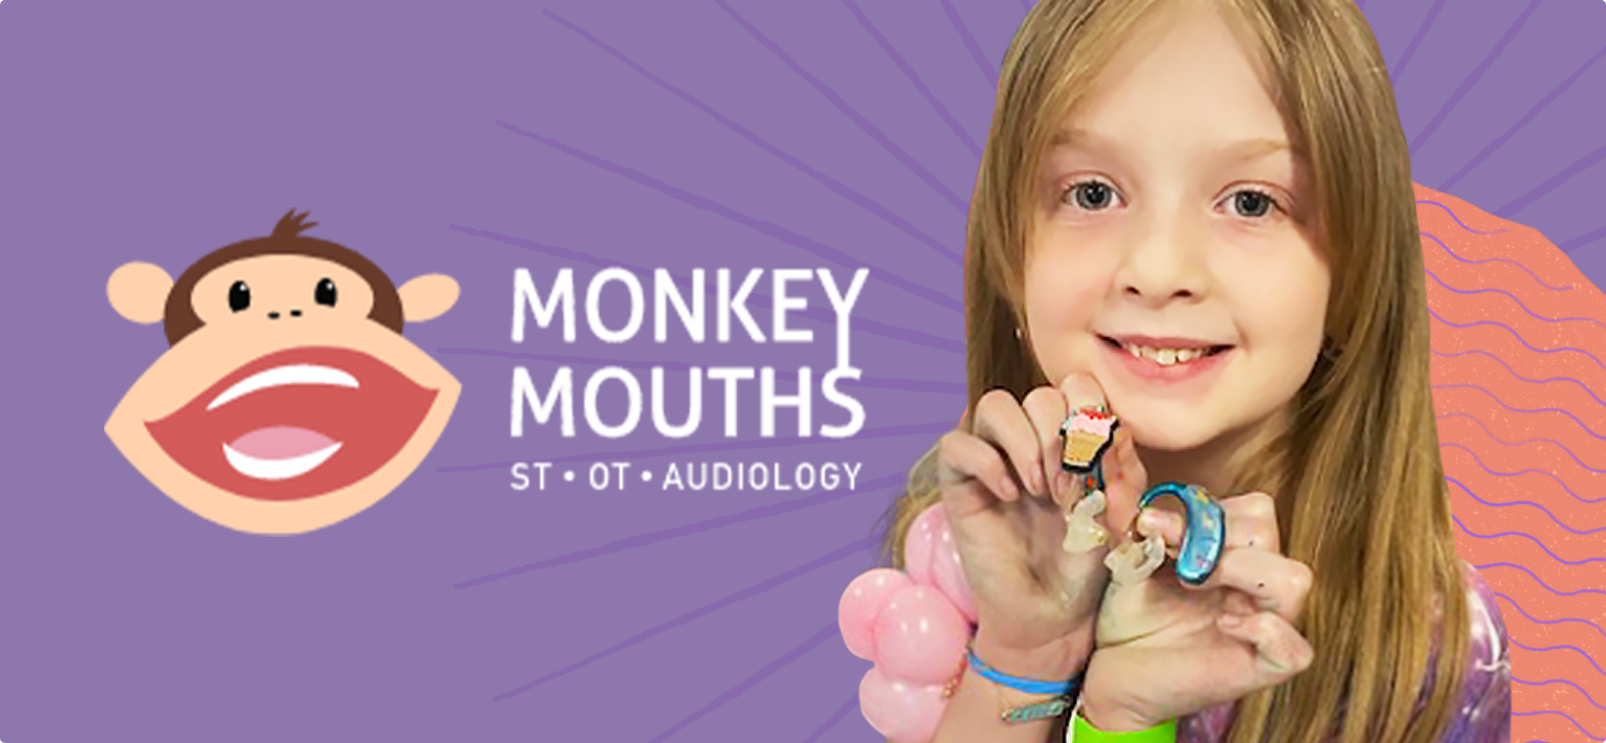 MonkeyMouths logo and graphic, fun and modern branding showing girl with hearing aids